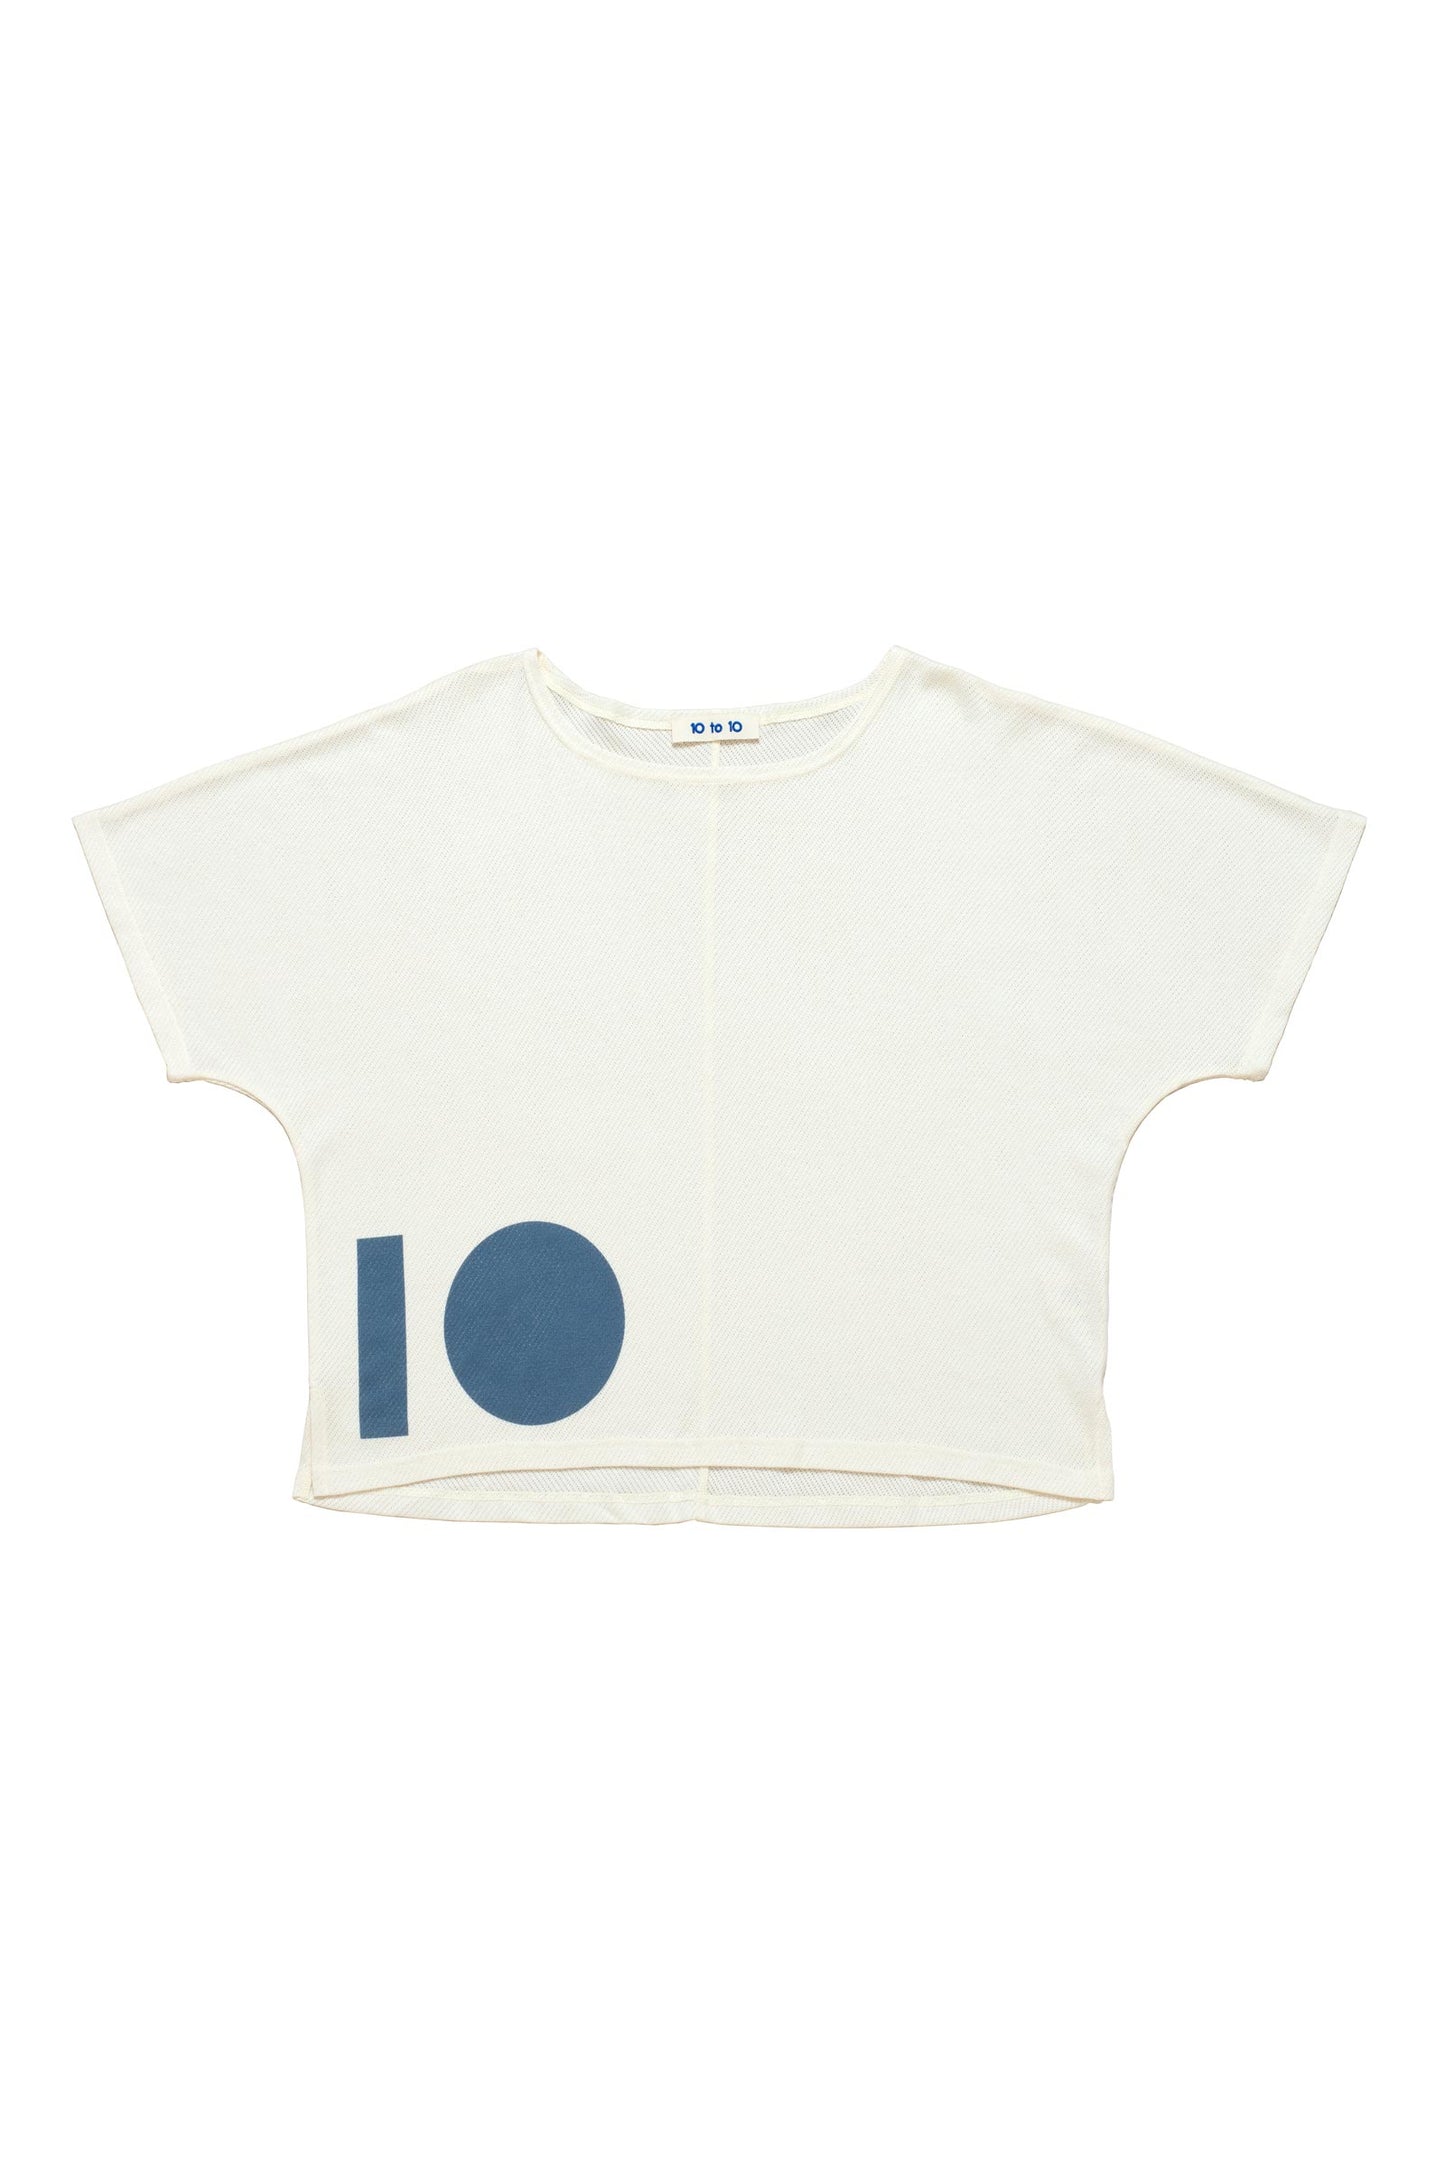 10 to 10 Beige perforated cotton T-Shirt with blue stamp